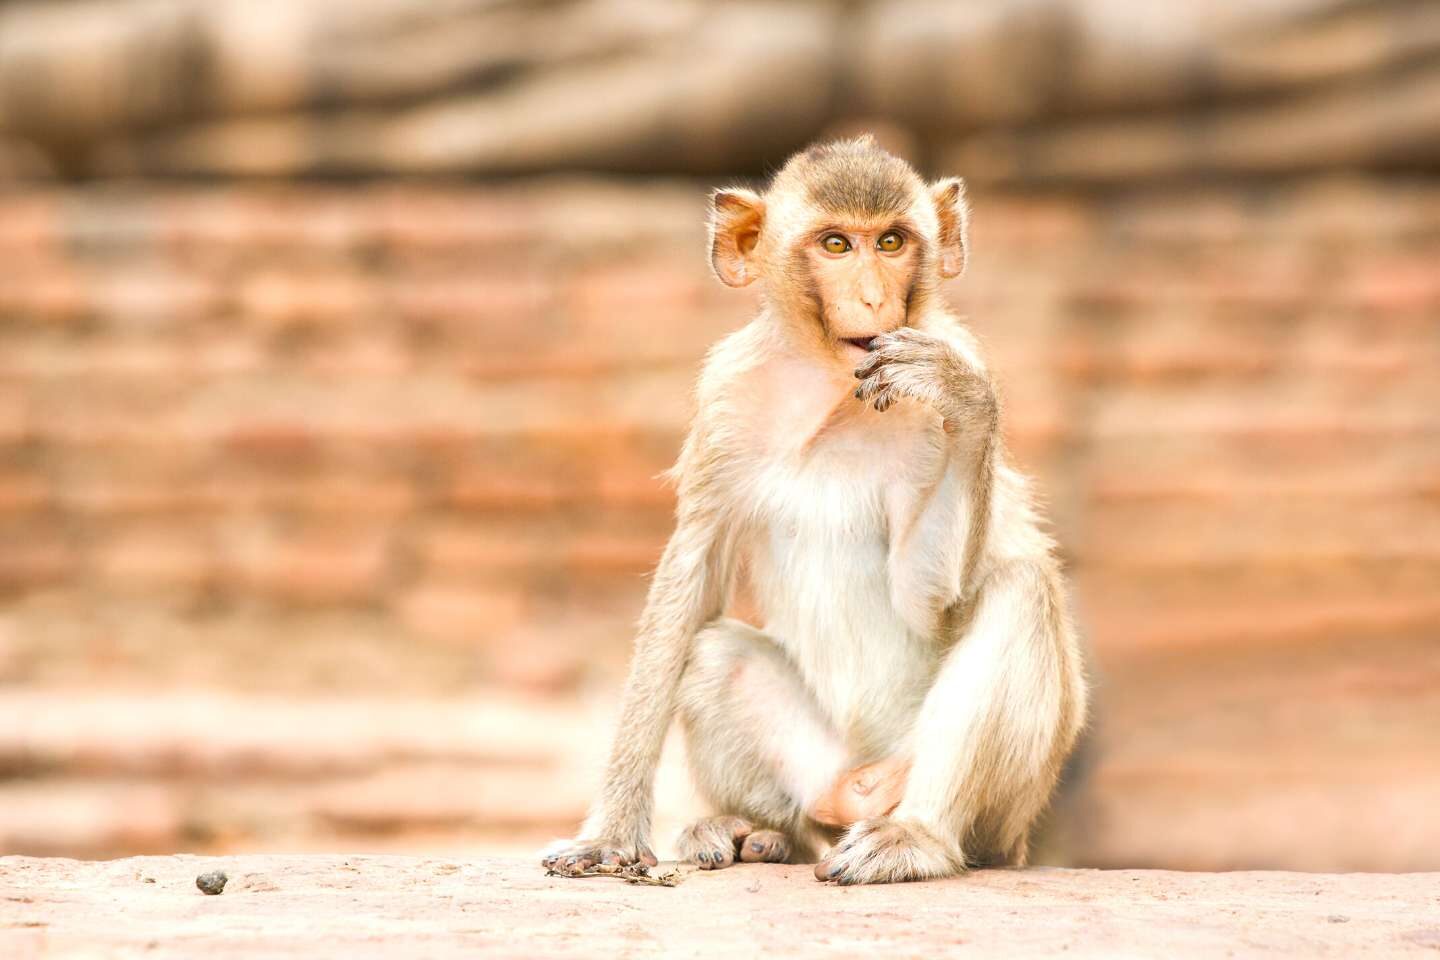 Monkey sitting in a small town of Lopburi, Thailand